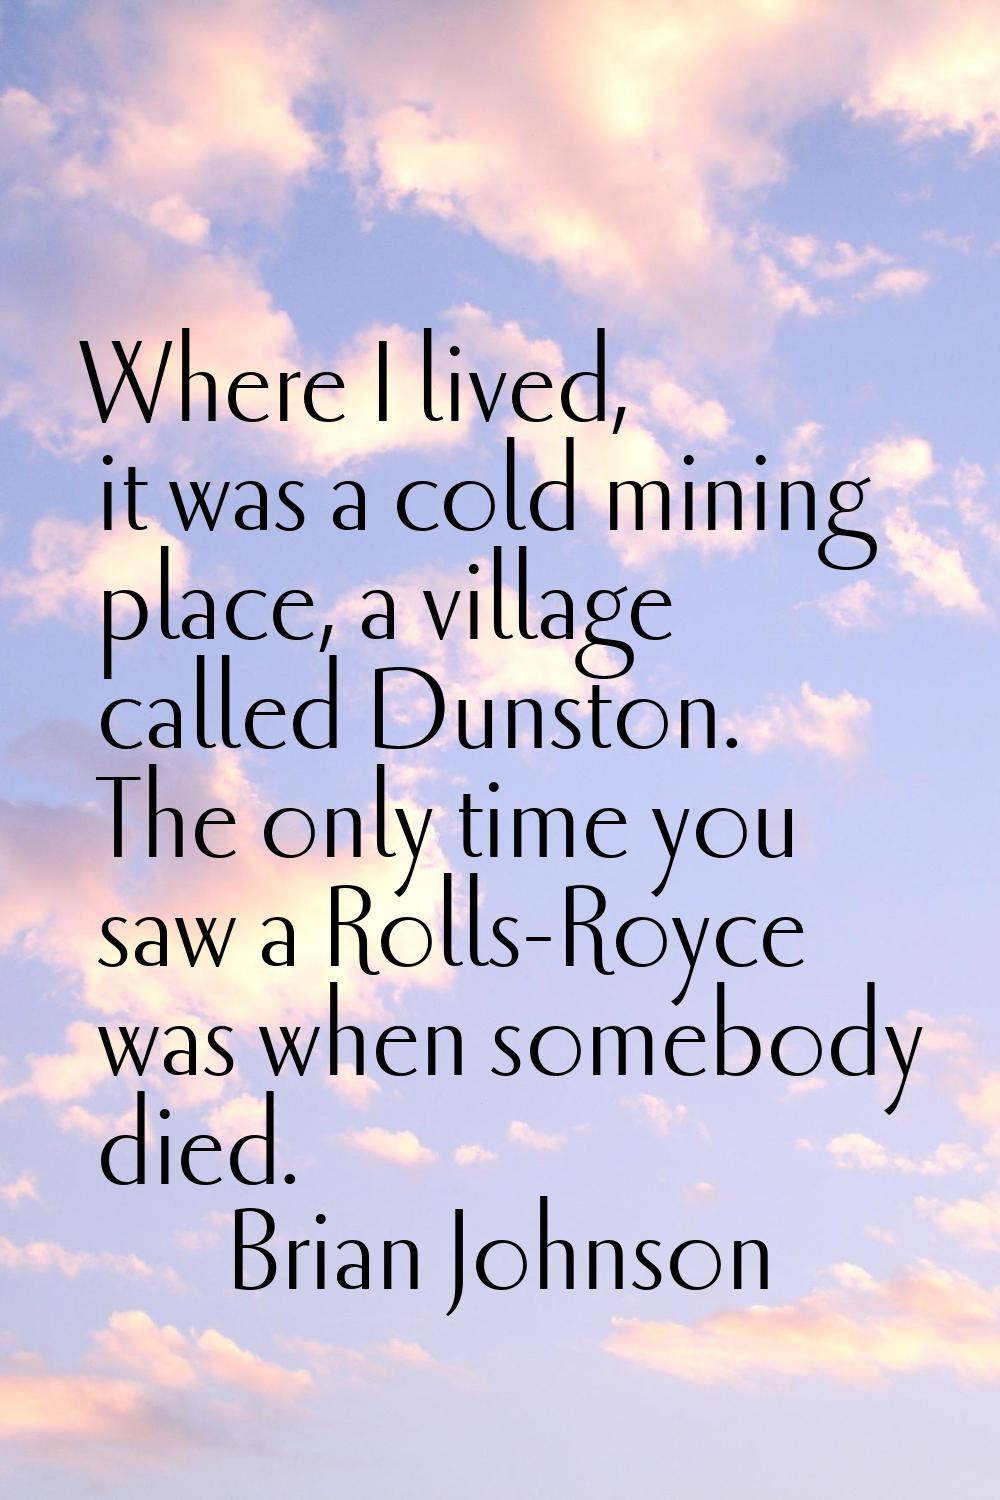 Where I lived, it was a cold mining place, a village called Dunston. The only time you saw a Rolls-